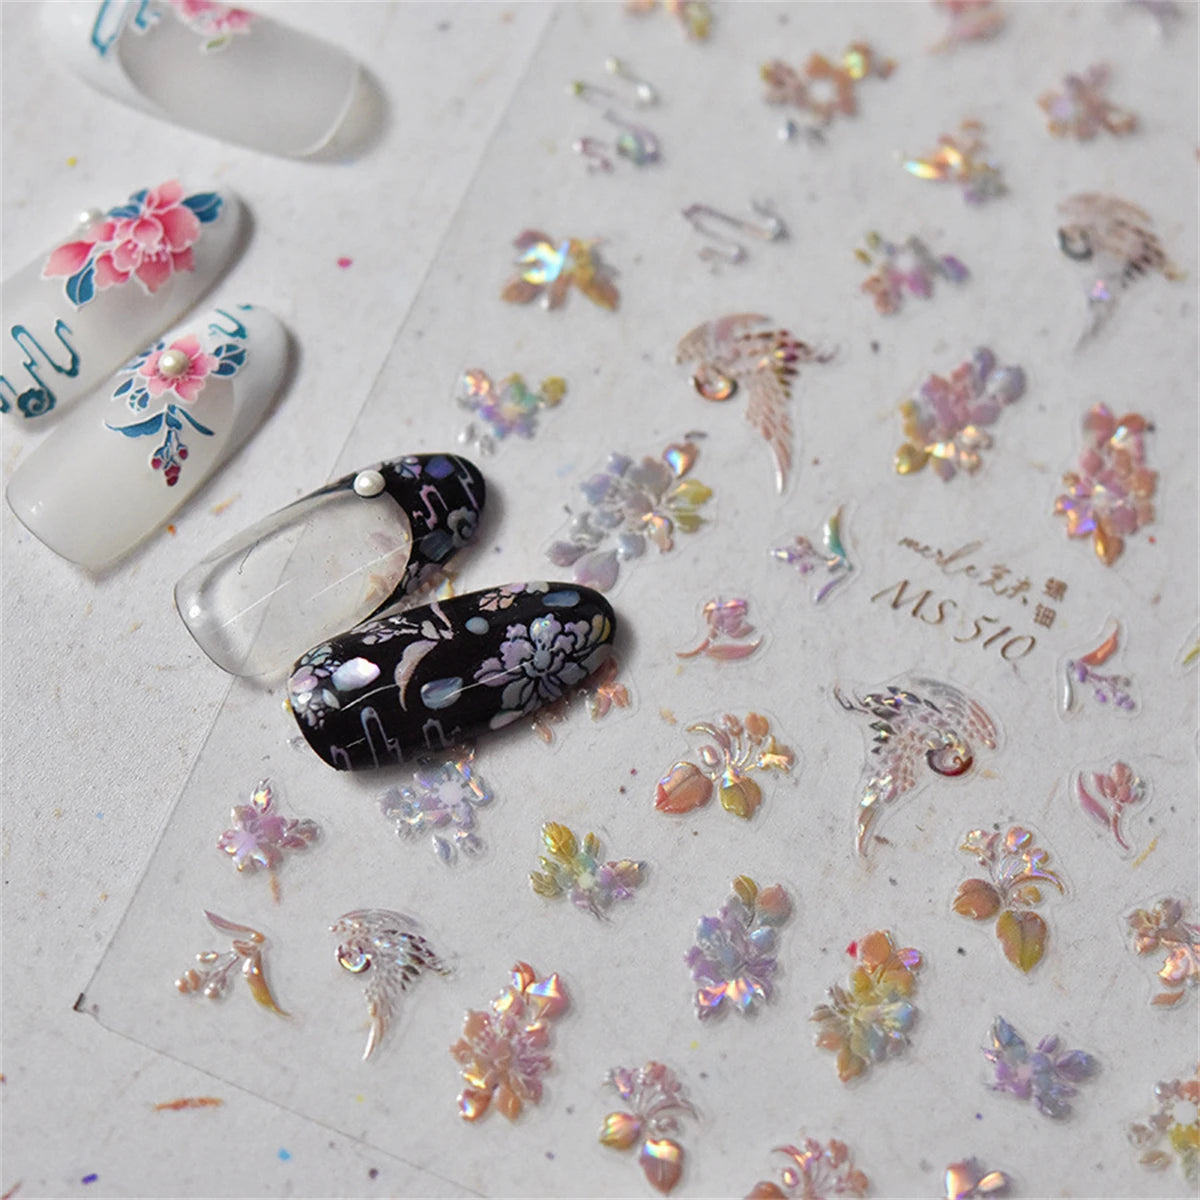 Flyshadow 1pcs 5D Exquisite Colorful Bird Flower Nail Art Stickers Relief Butterfly Dragon Nail Decoration Decals DIY Manicure Accessories